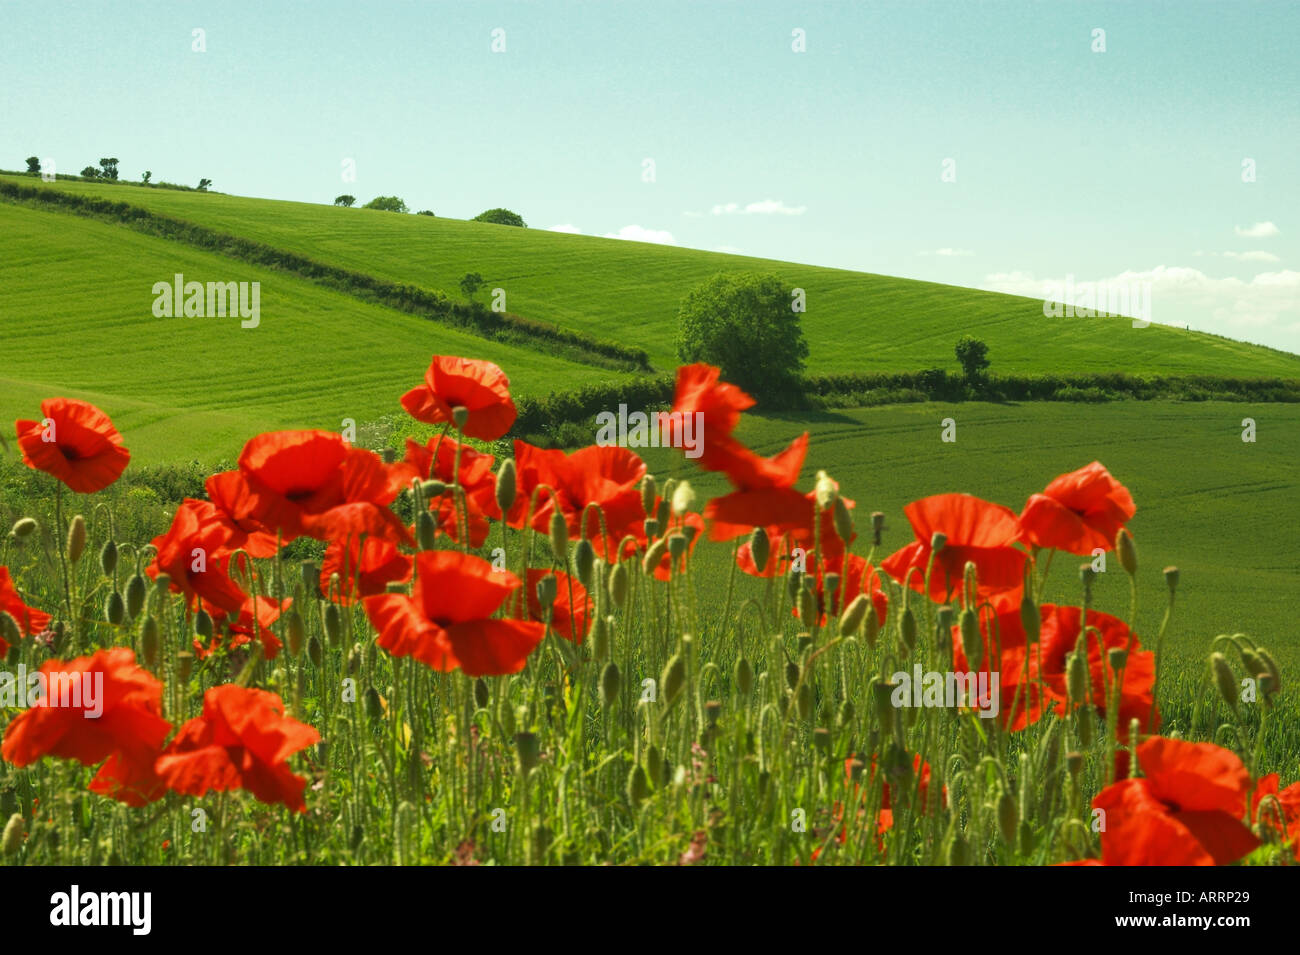 Poppies against the greenery of the English countryside Stock Photo